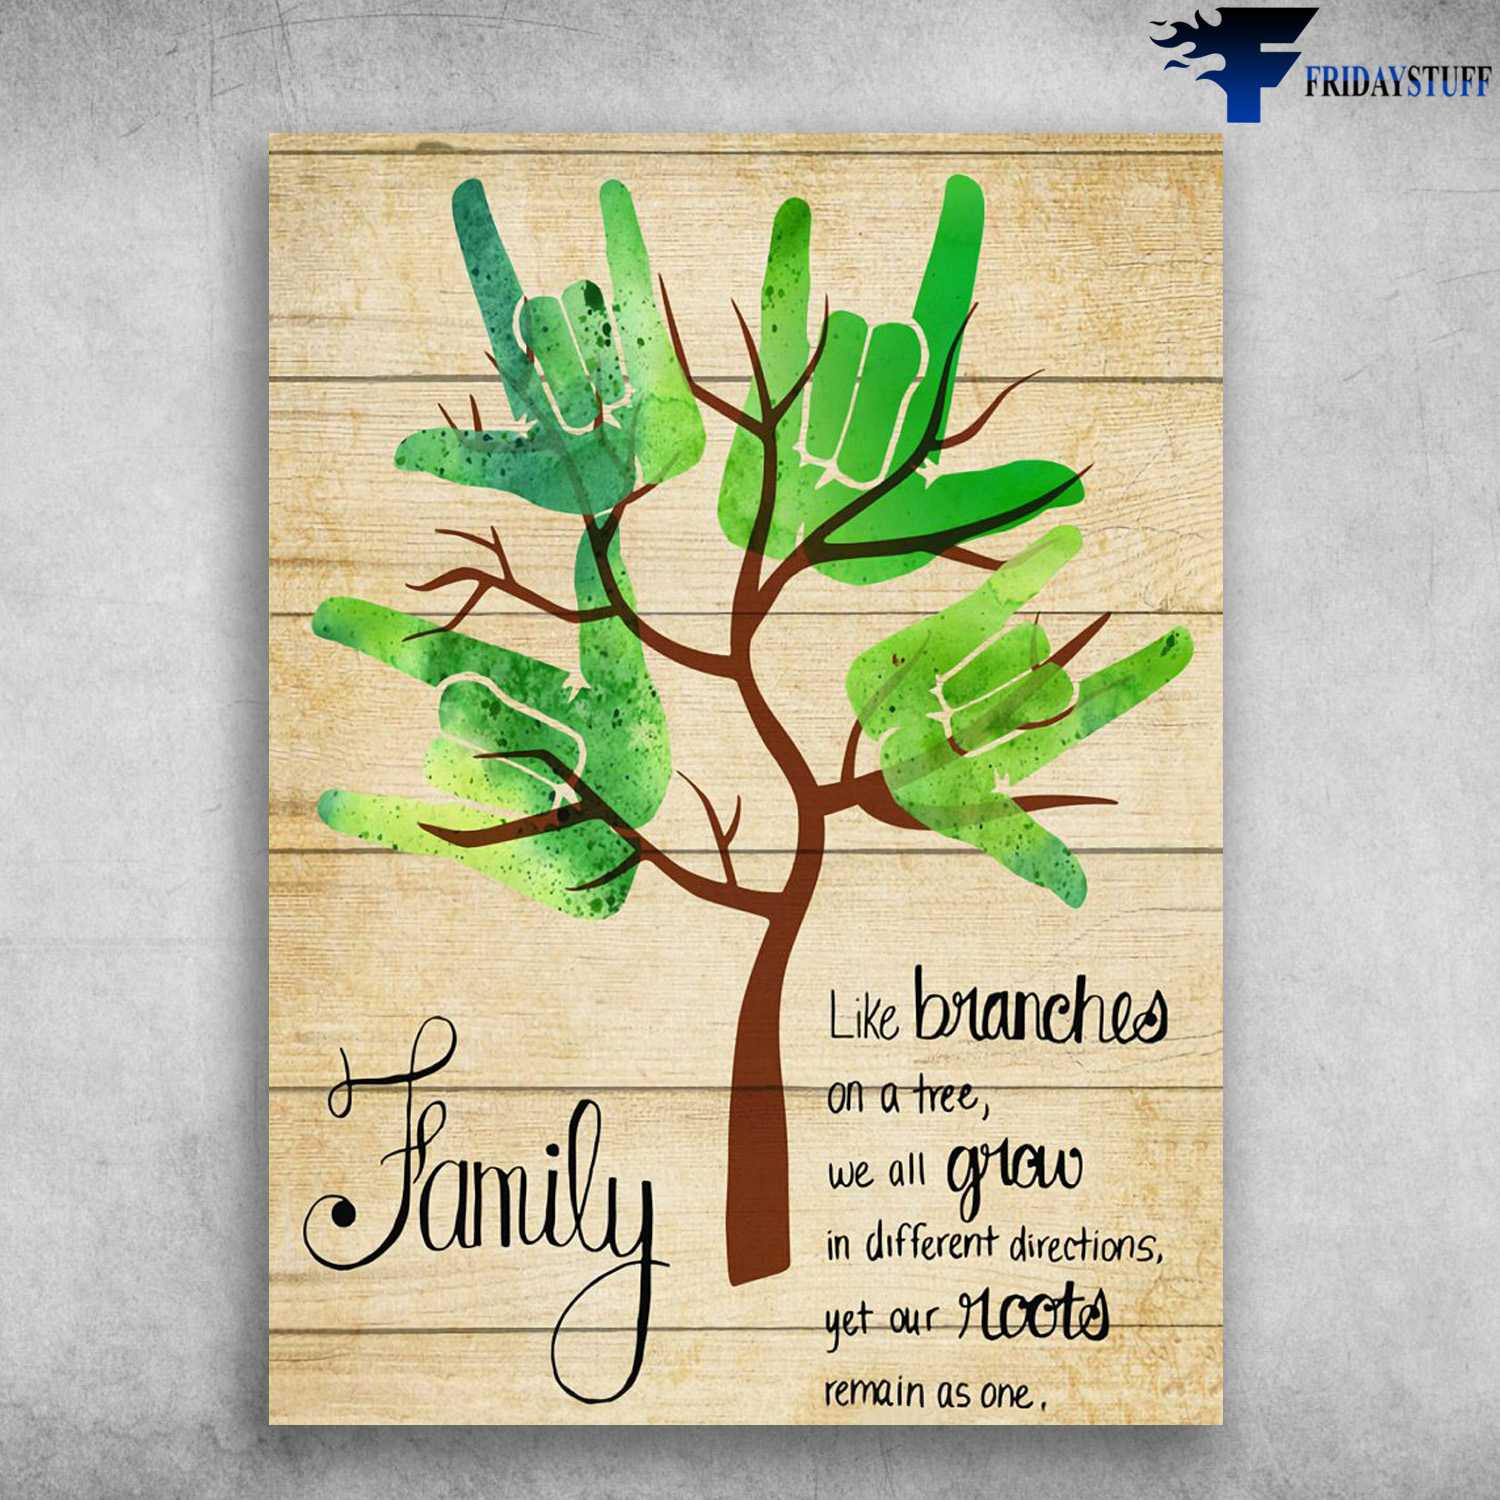 Sign Language, Family Tree, Like Branches On A Tree, We All Grow In Different Directions, Yet Our Roots Remain As One